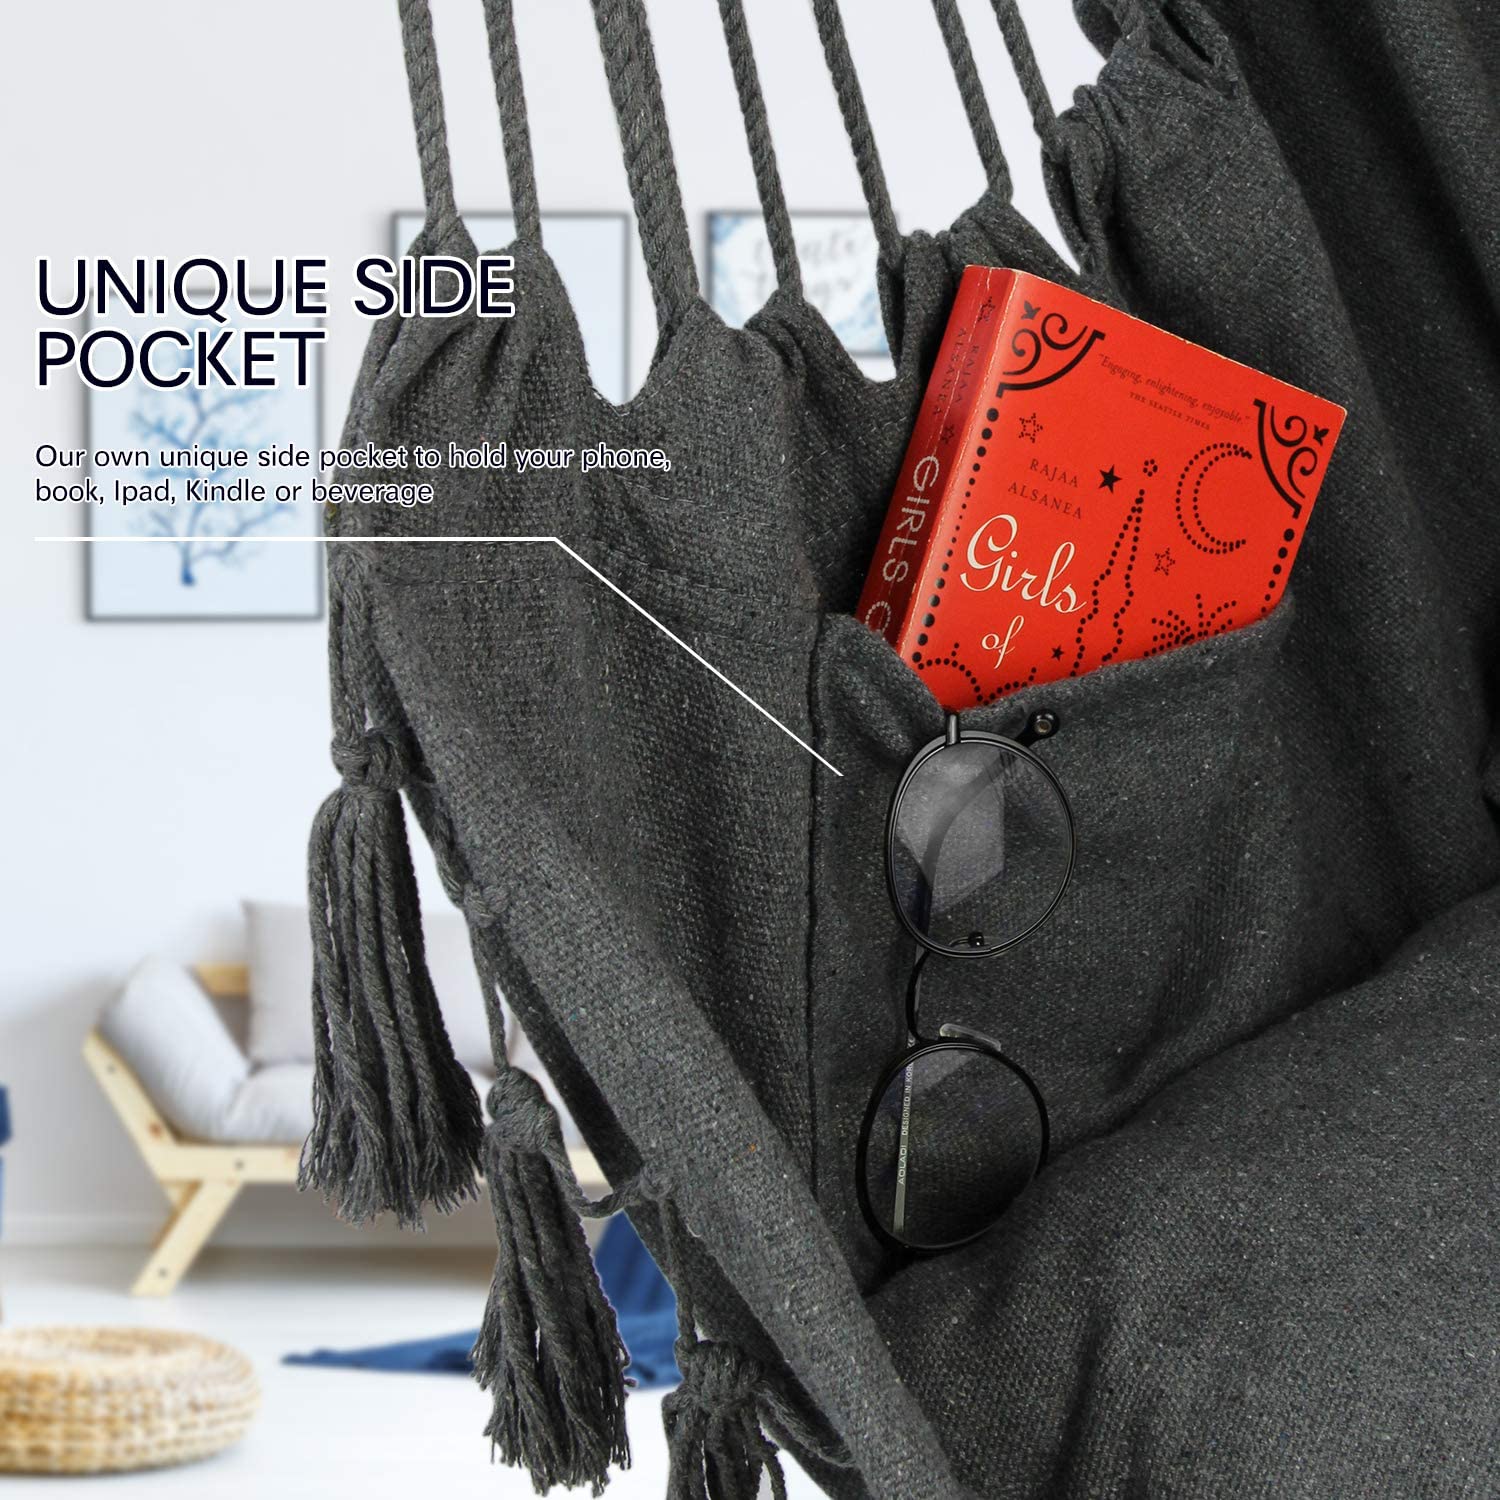 Max-330Lbs150KG-Hammock-Chair-Hanging-Rope-Swing-with-2-Cushions-Included-Large-Tassel-Hanging-Chair-1726402-7